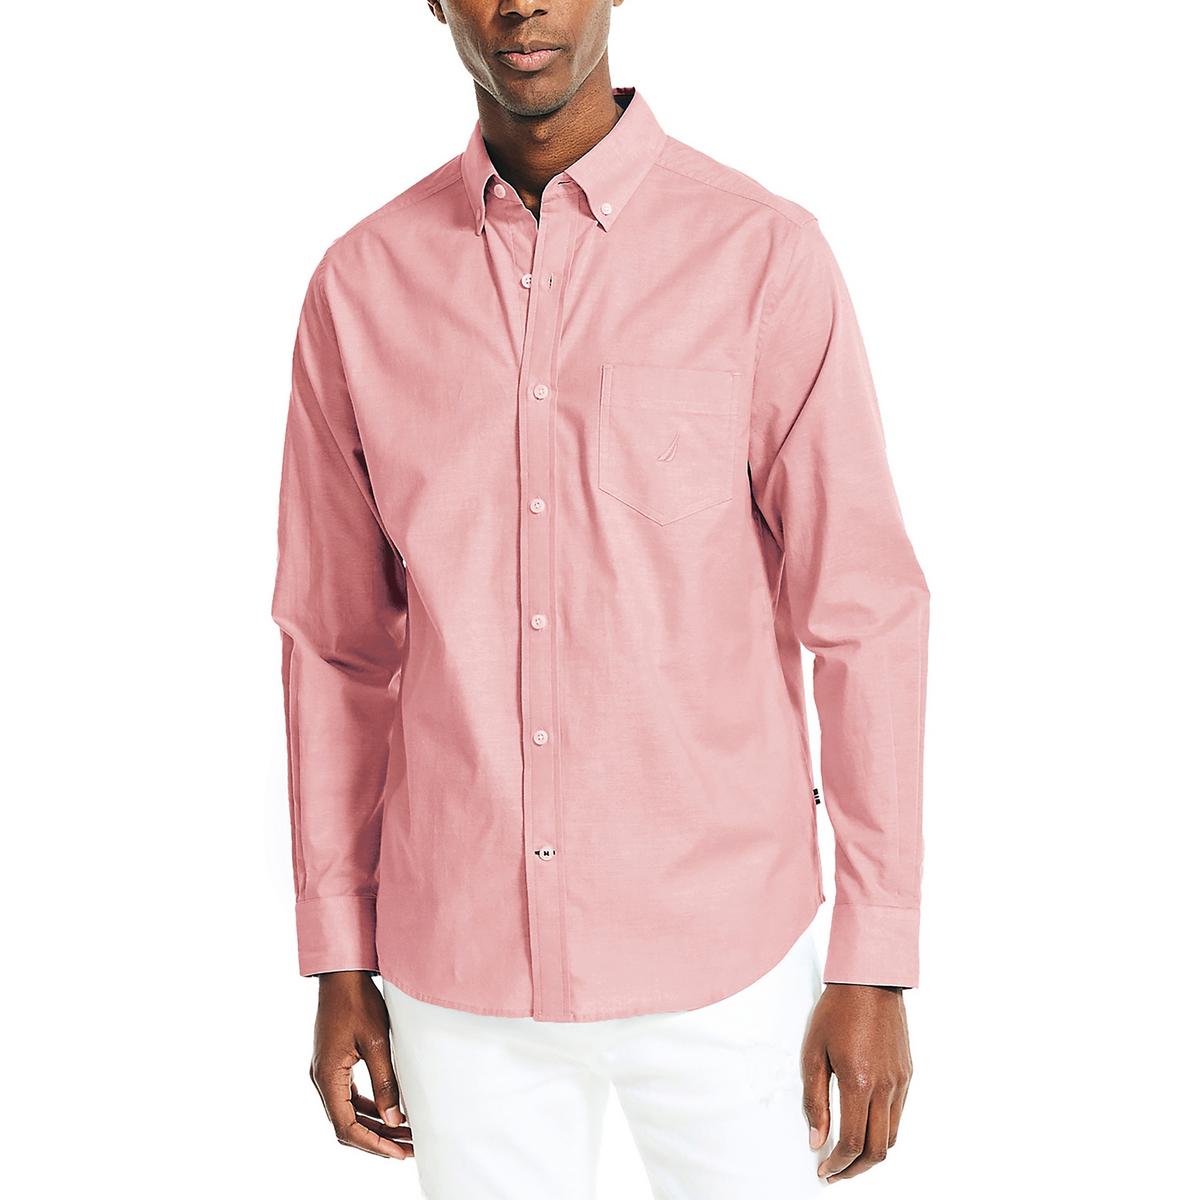 Nautica Mens Classic Fit Collared Button-Down Shirt